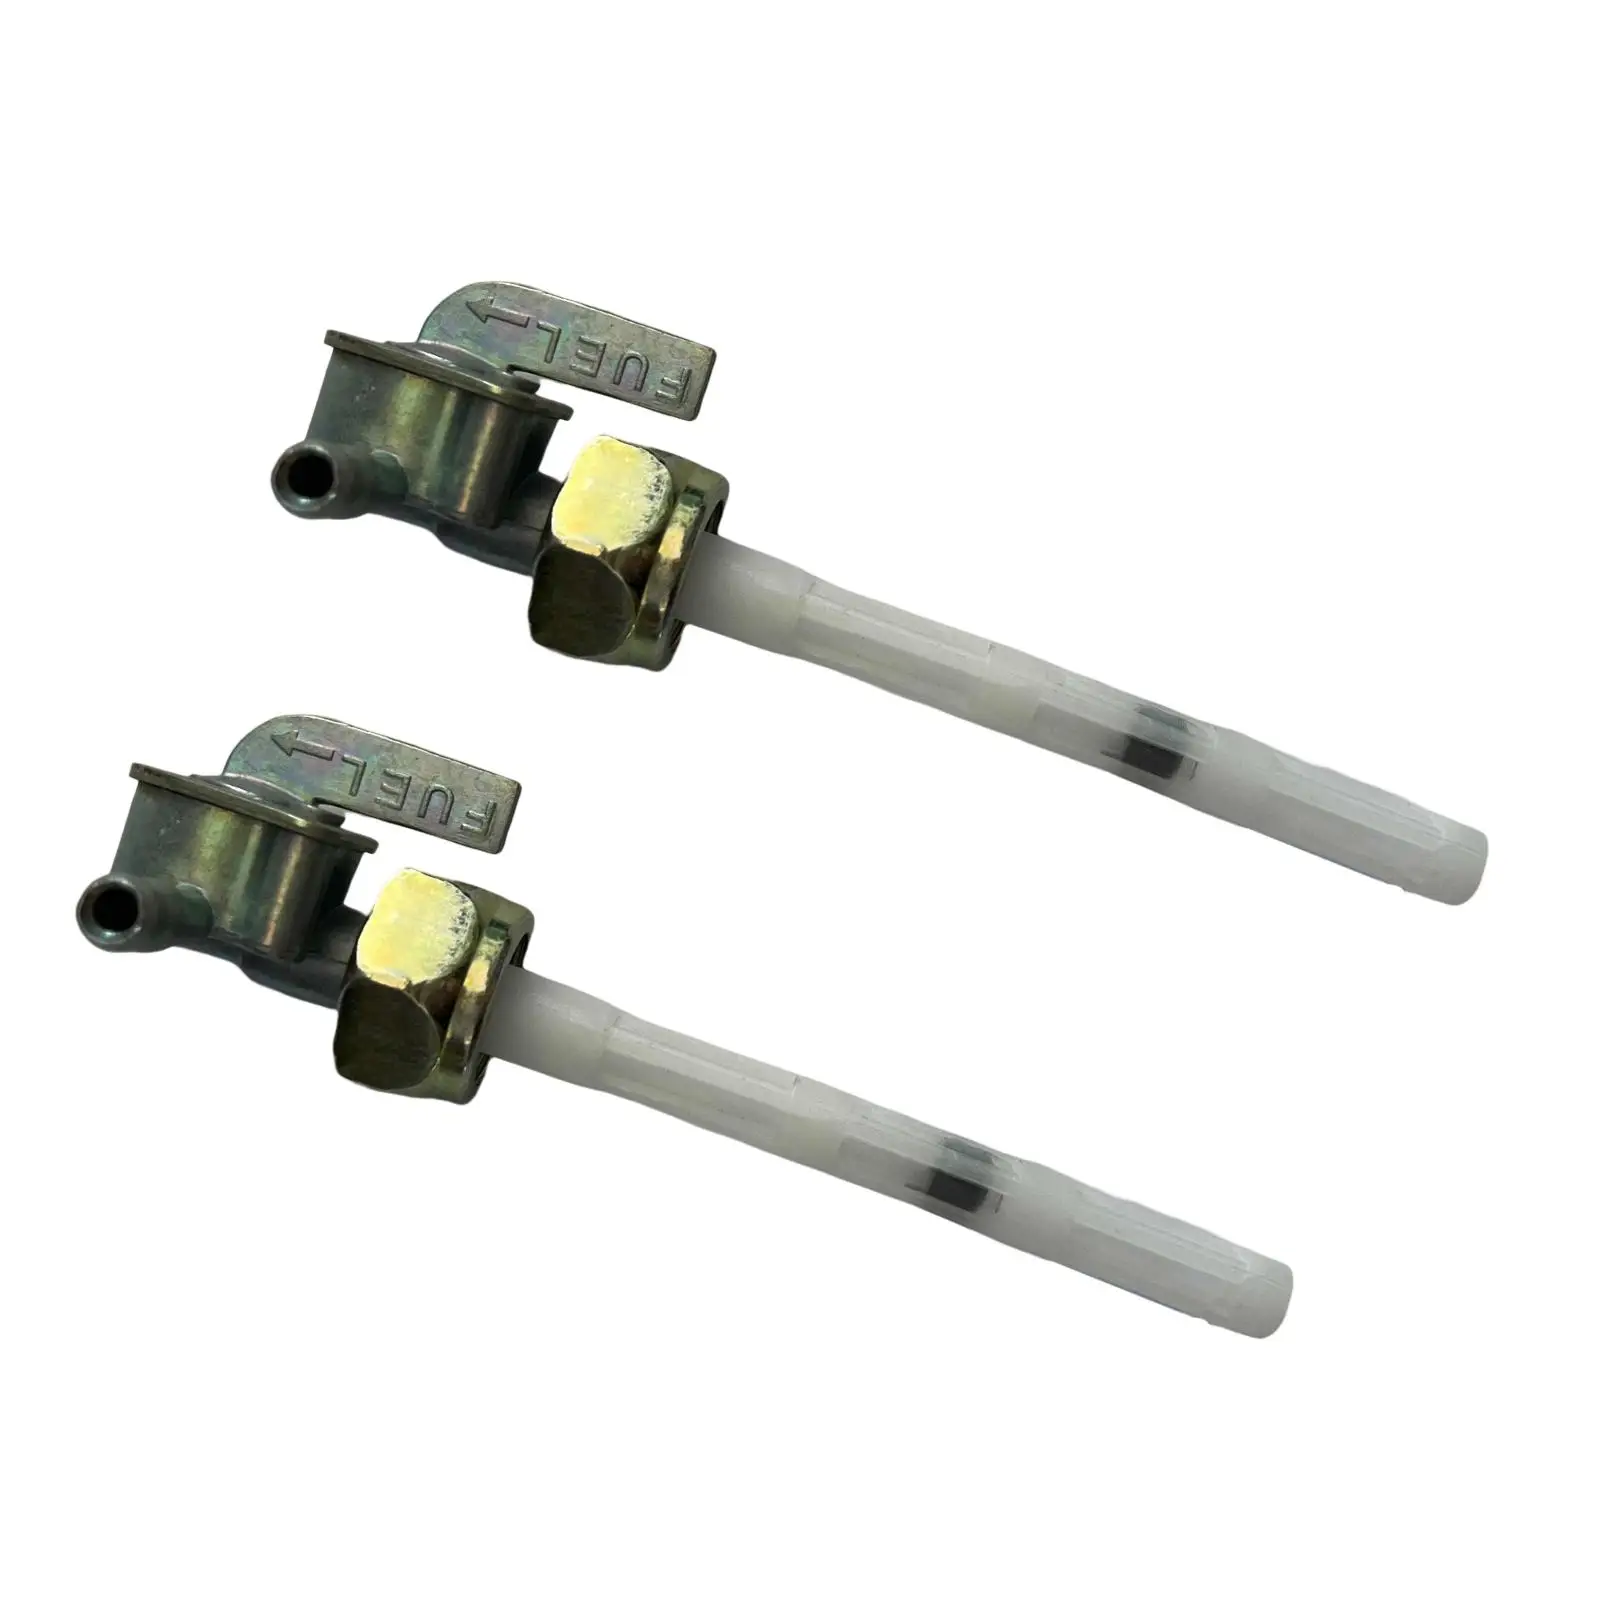 2X Motorcycle Fuel Gas Tank Petcock Valve Switch for  CG125 125CC